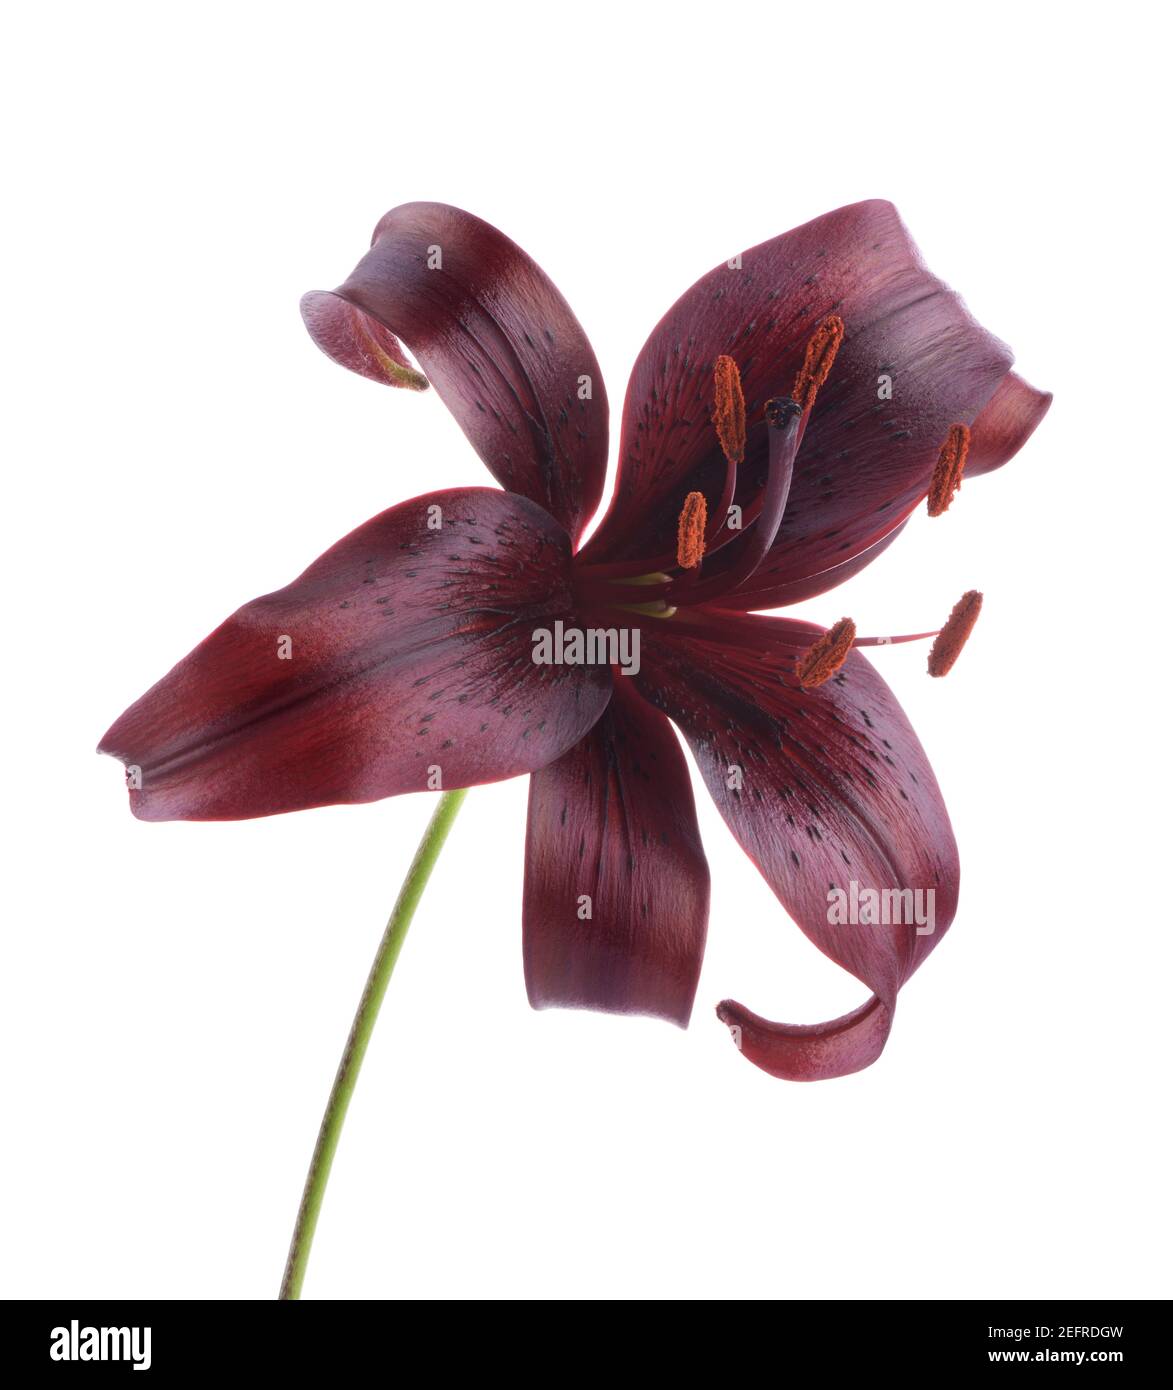 Artistic close-up of a dark burgundy Asiatic Lily flower, Midnight Mystery, isolated on white studio background. Dark red, maroon color. Stock Photo